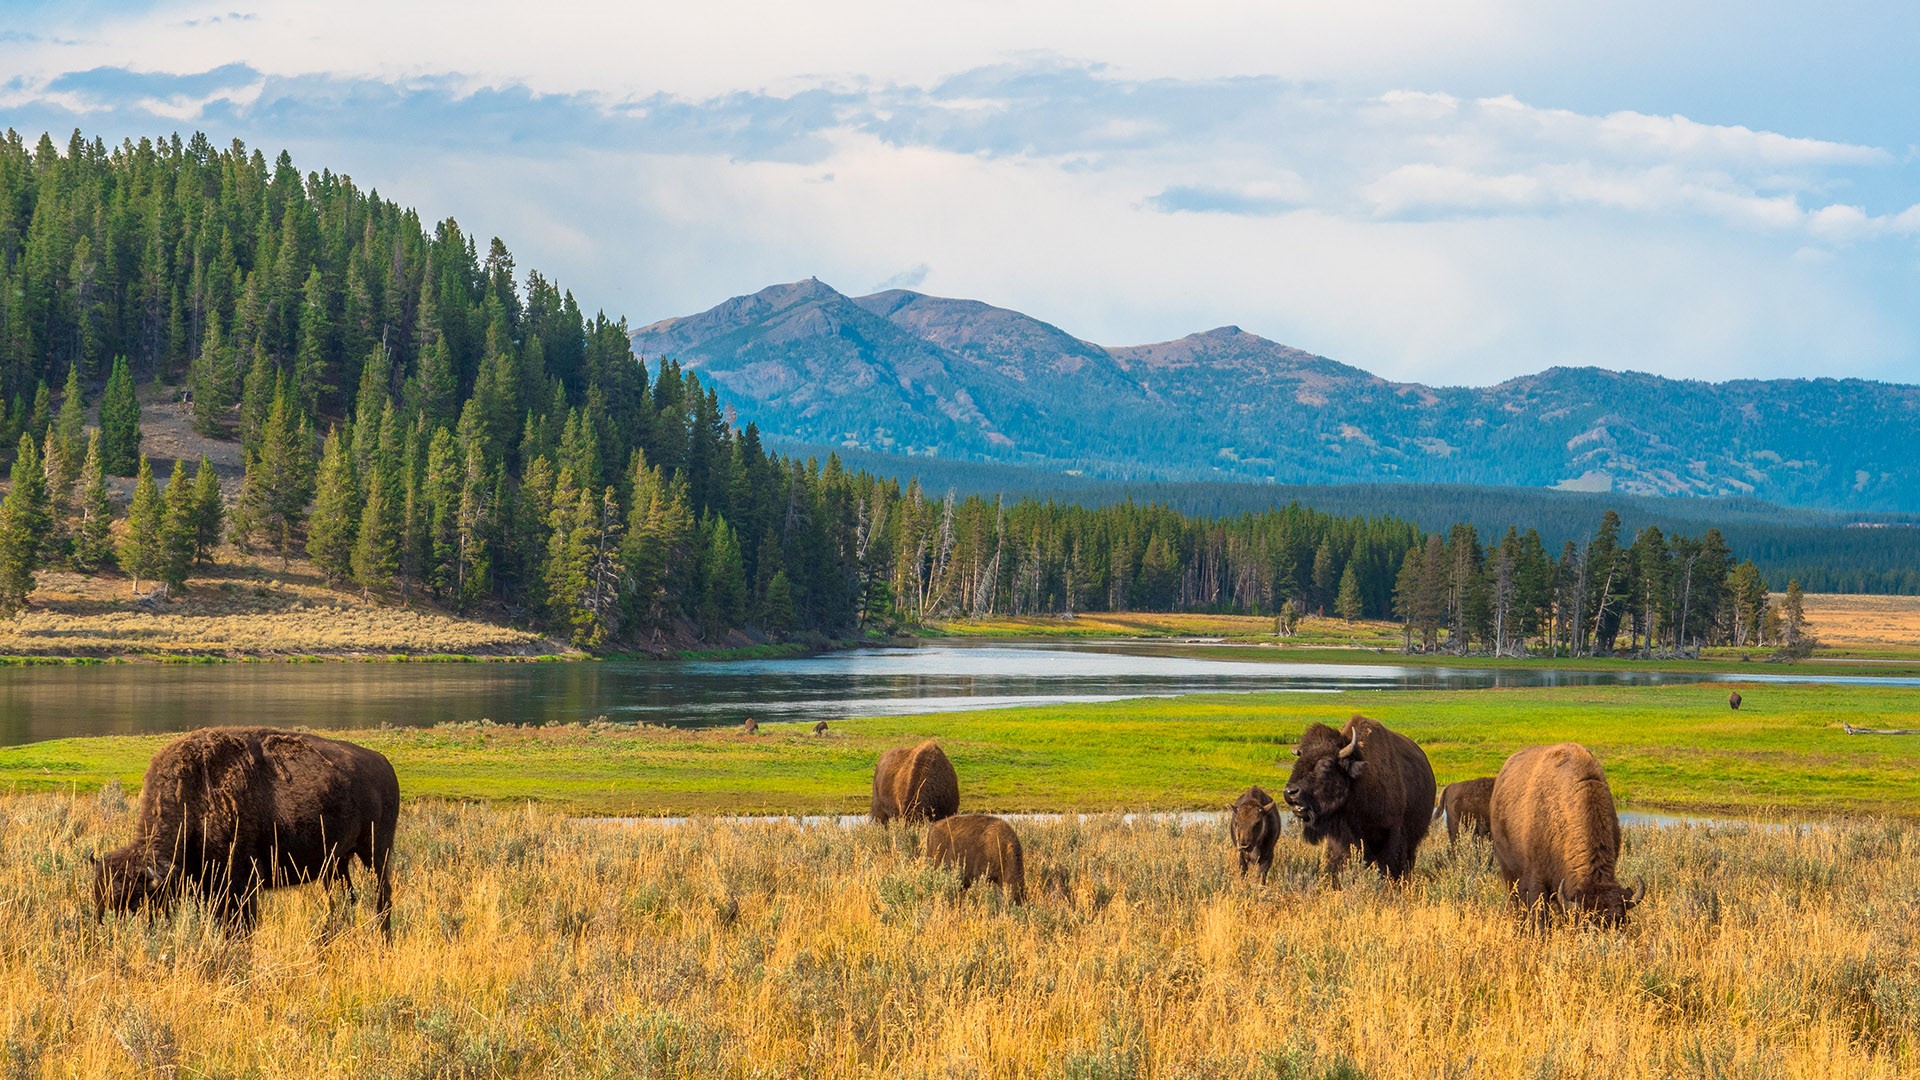 General 1920x1080 nature landscape trees forest mountains river bison plants grass water Yellowstone National Park Wyoming USA animals mammals field